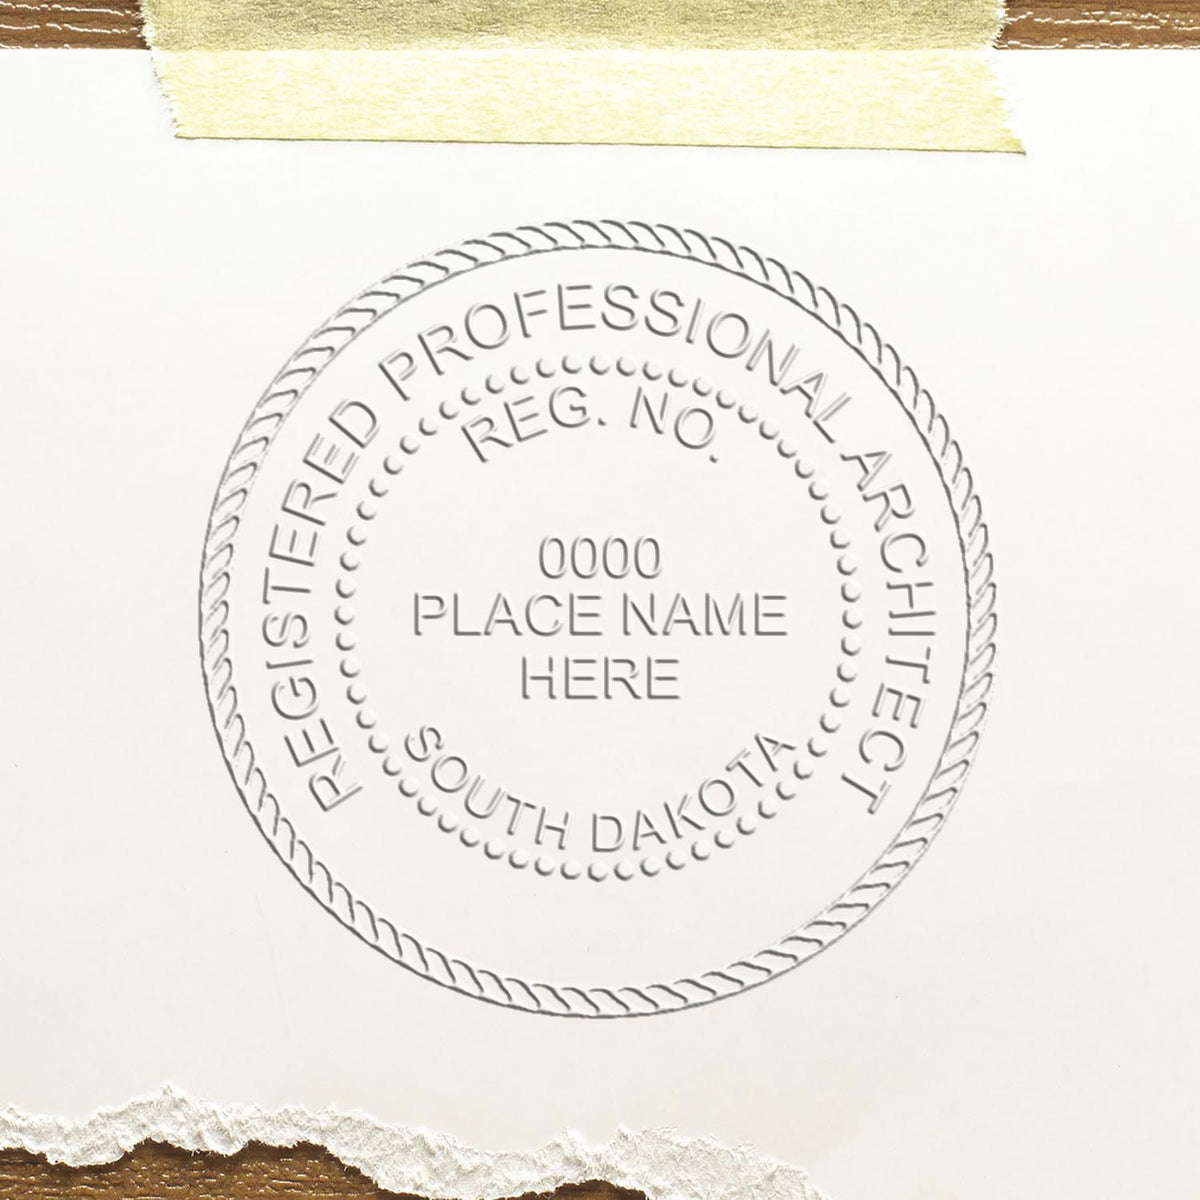 This paper is stamped with a sample imprint of the Extended Long Reach South Dakota Architect Seal Embosser, signifying its quality and reliability.